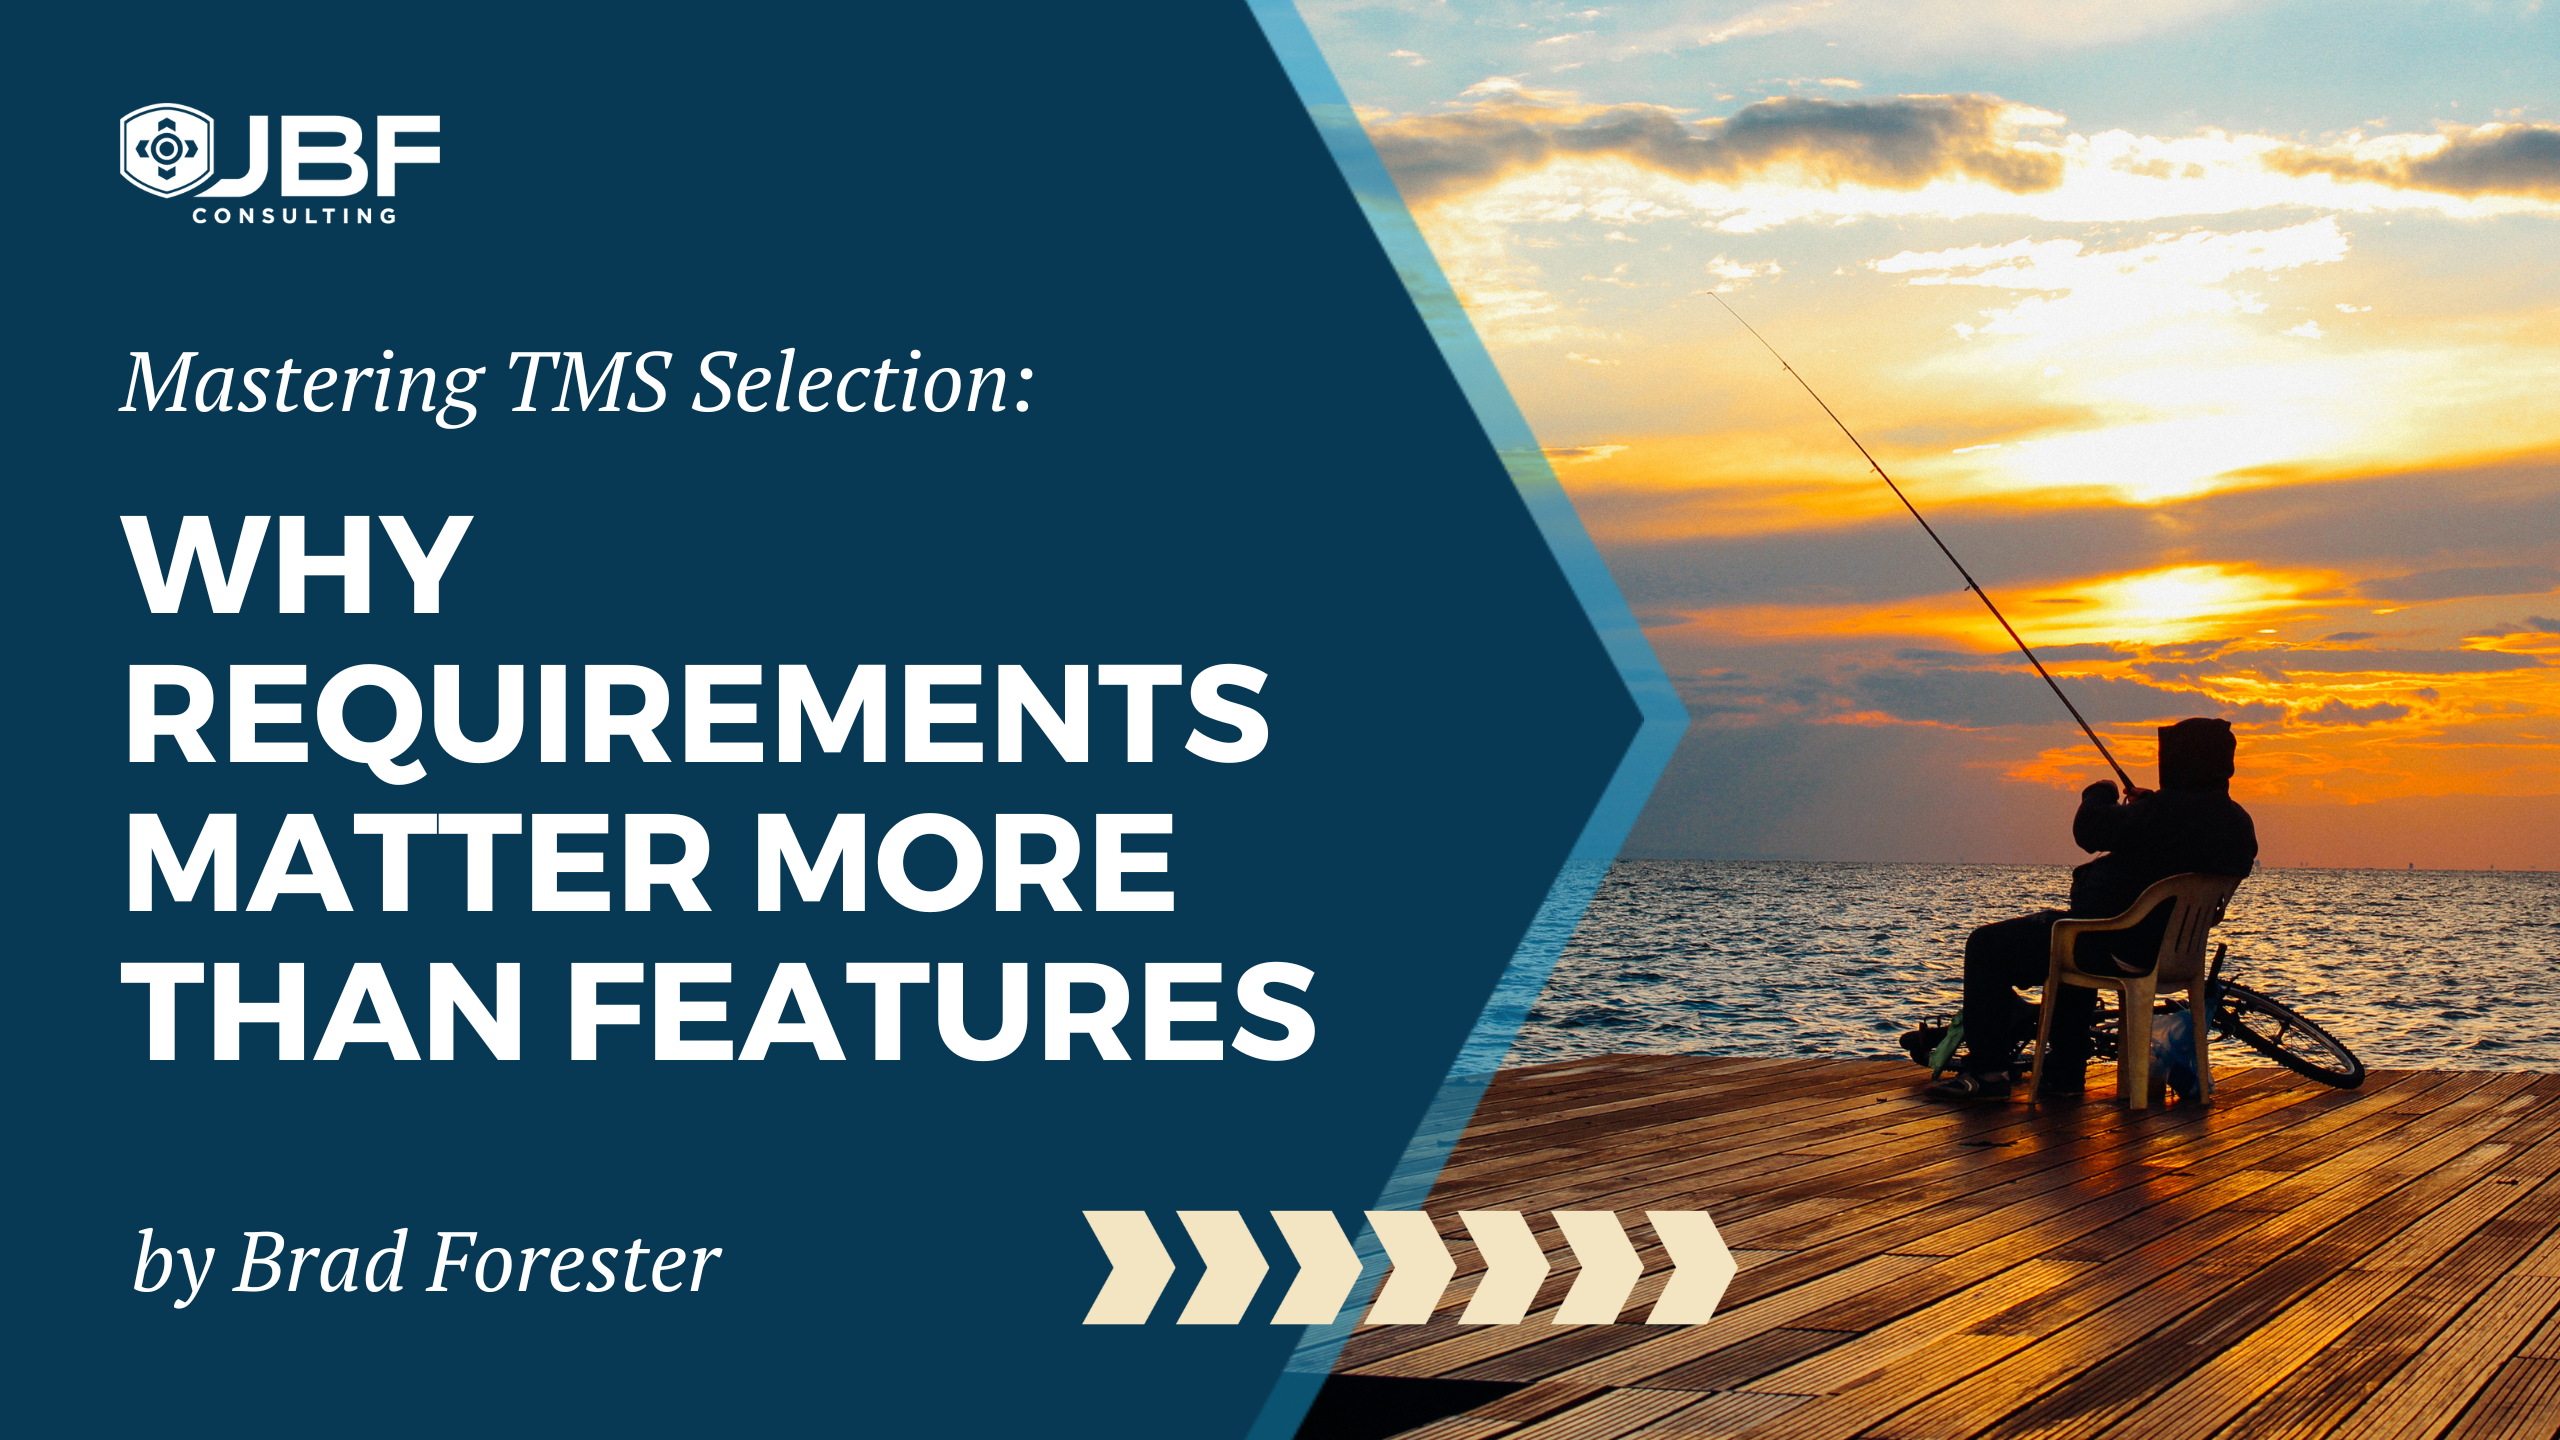 Mastering TMS Selection: Why Requirements Matter More Than Features